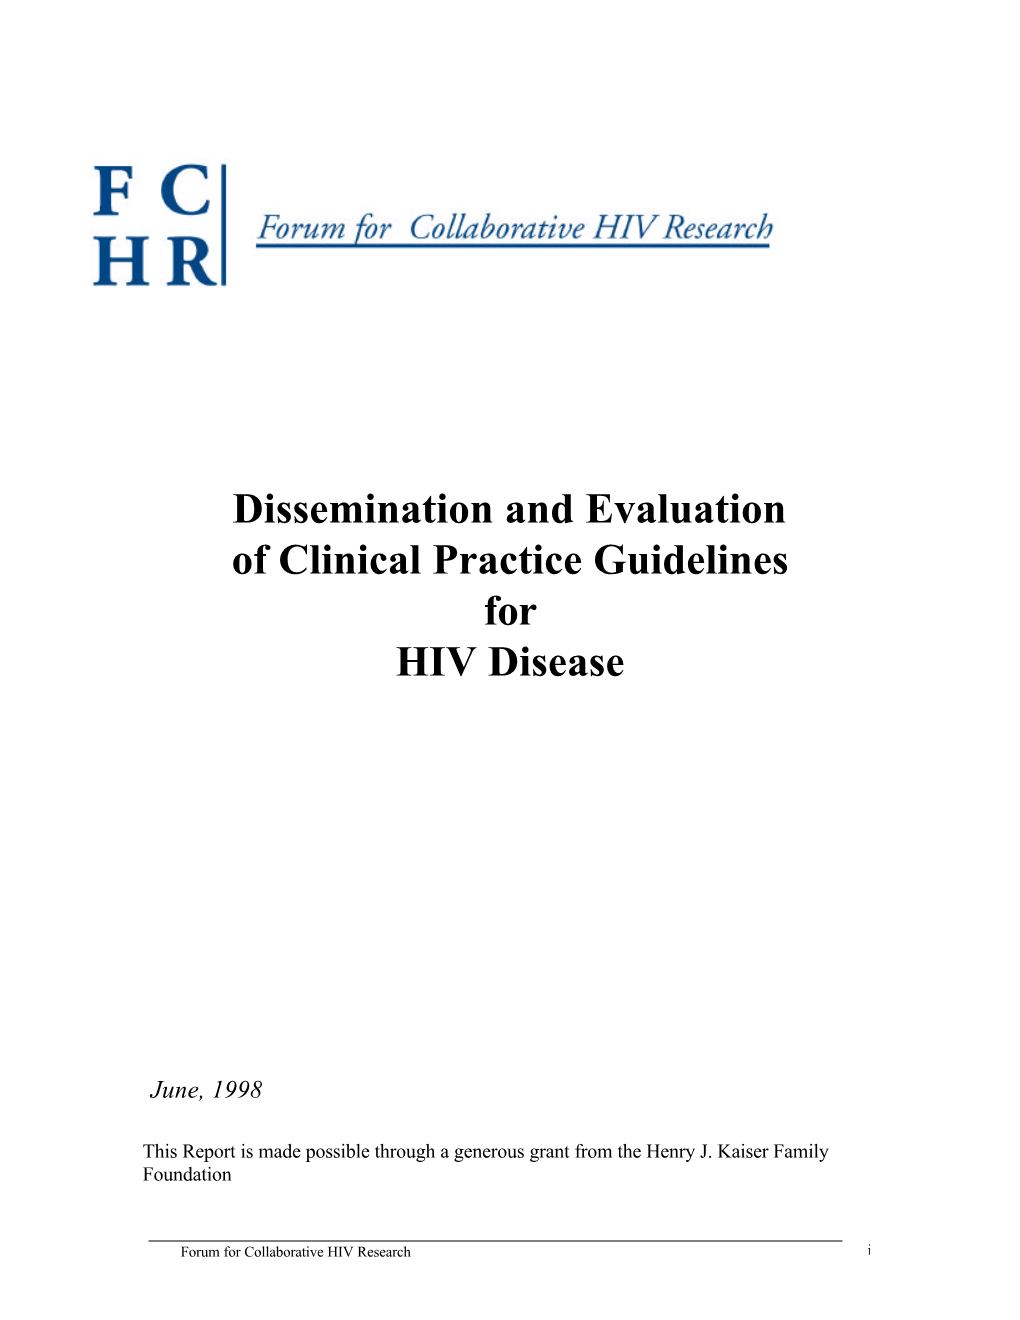 Dissemination and Evaluation of Clinical Practice Guidelines for HIV Disease